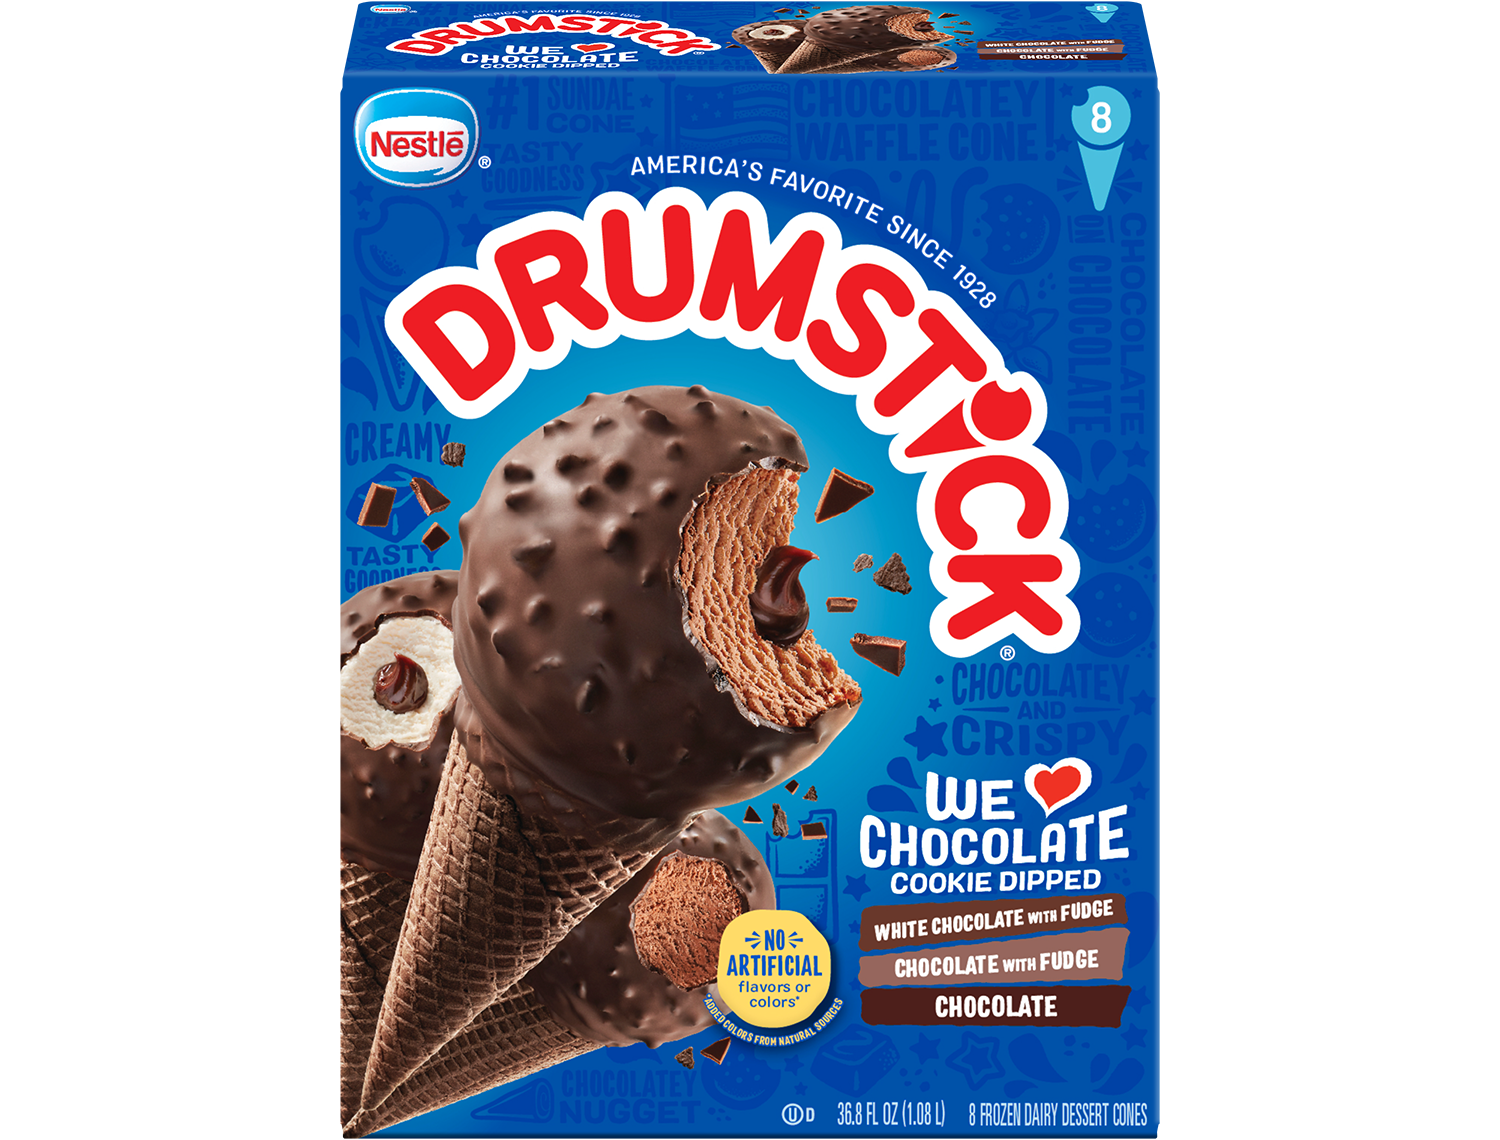 Photo of Drumstick We 'heart' chocolate pack in retail packaging.